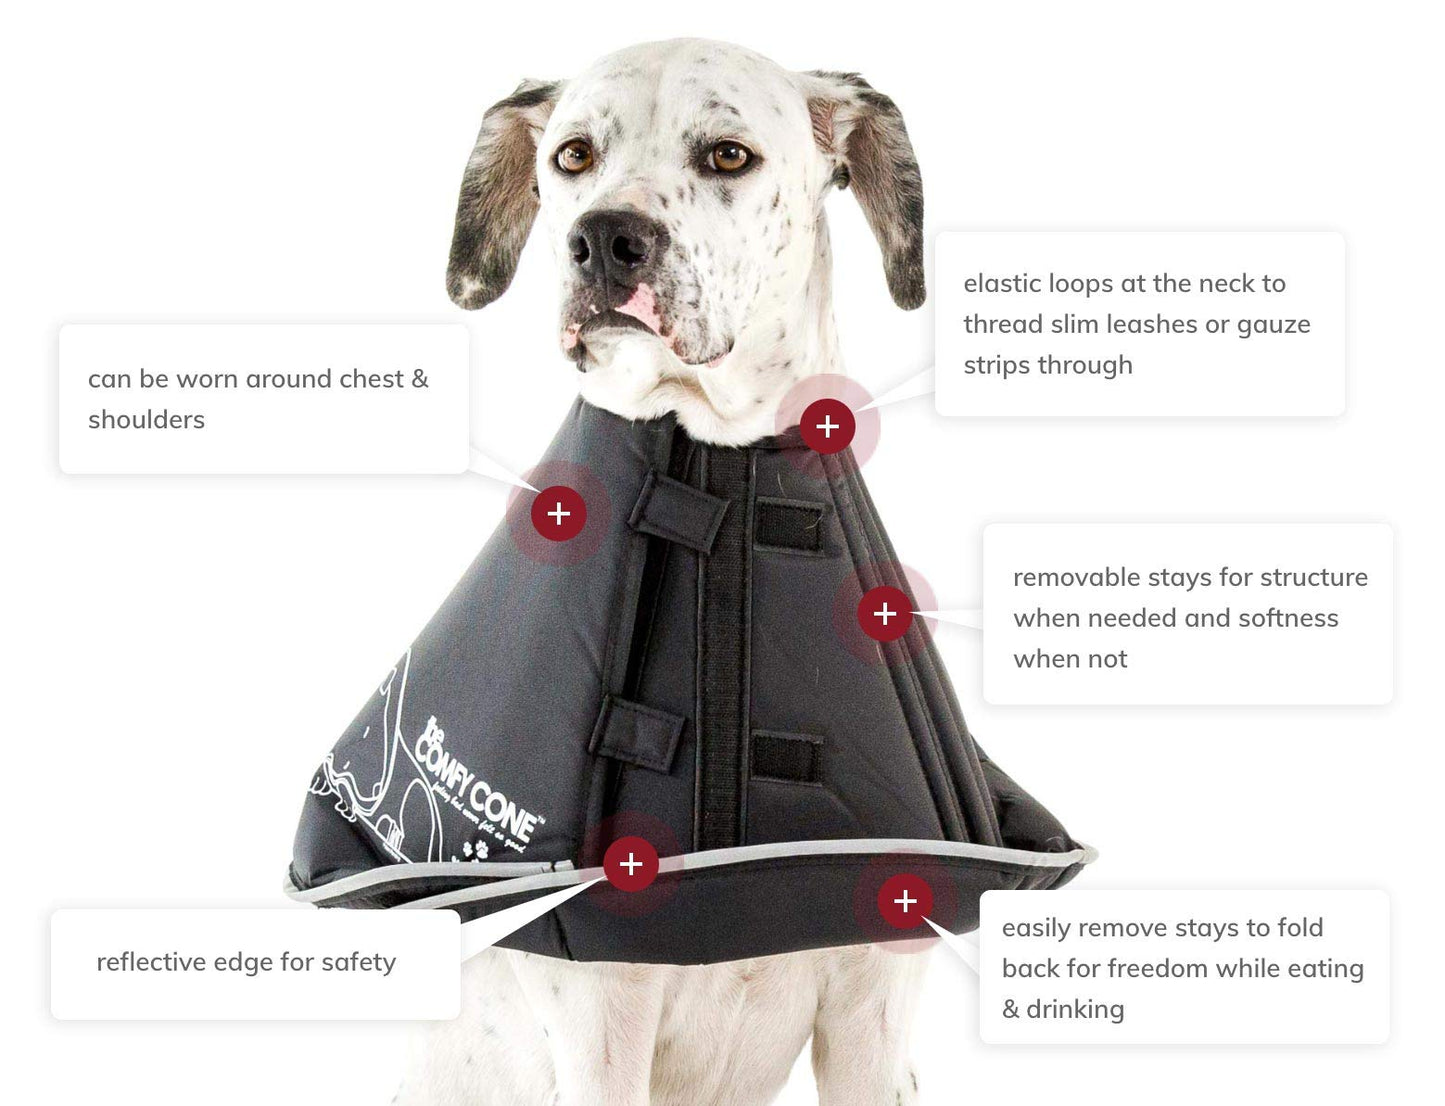 The Original Black Comfy Cone Soft Pet Recovery Collar by All Four Paws